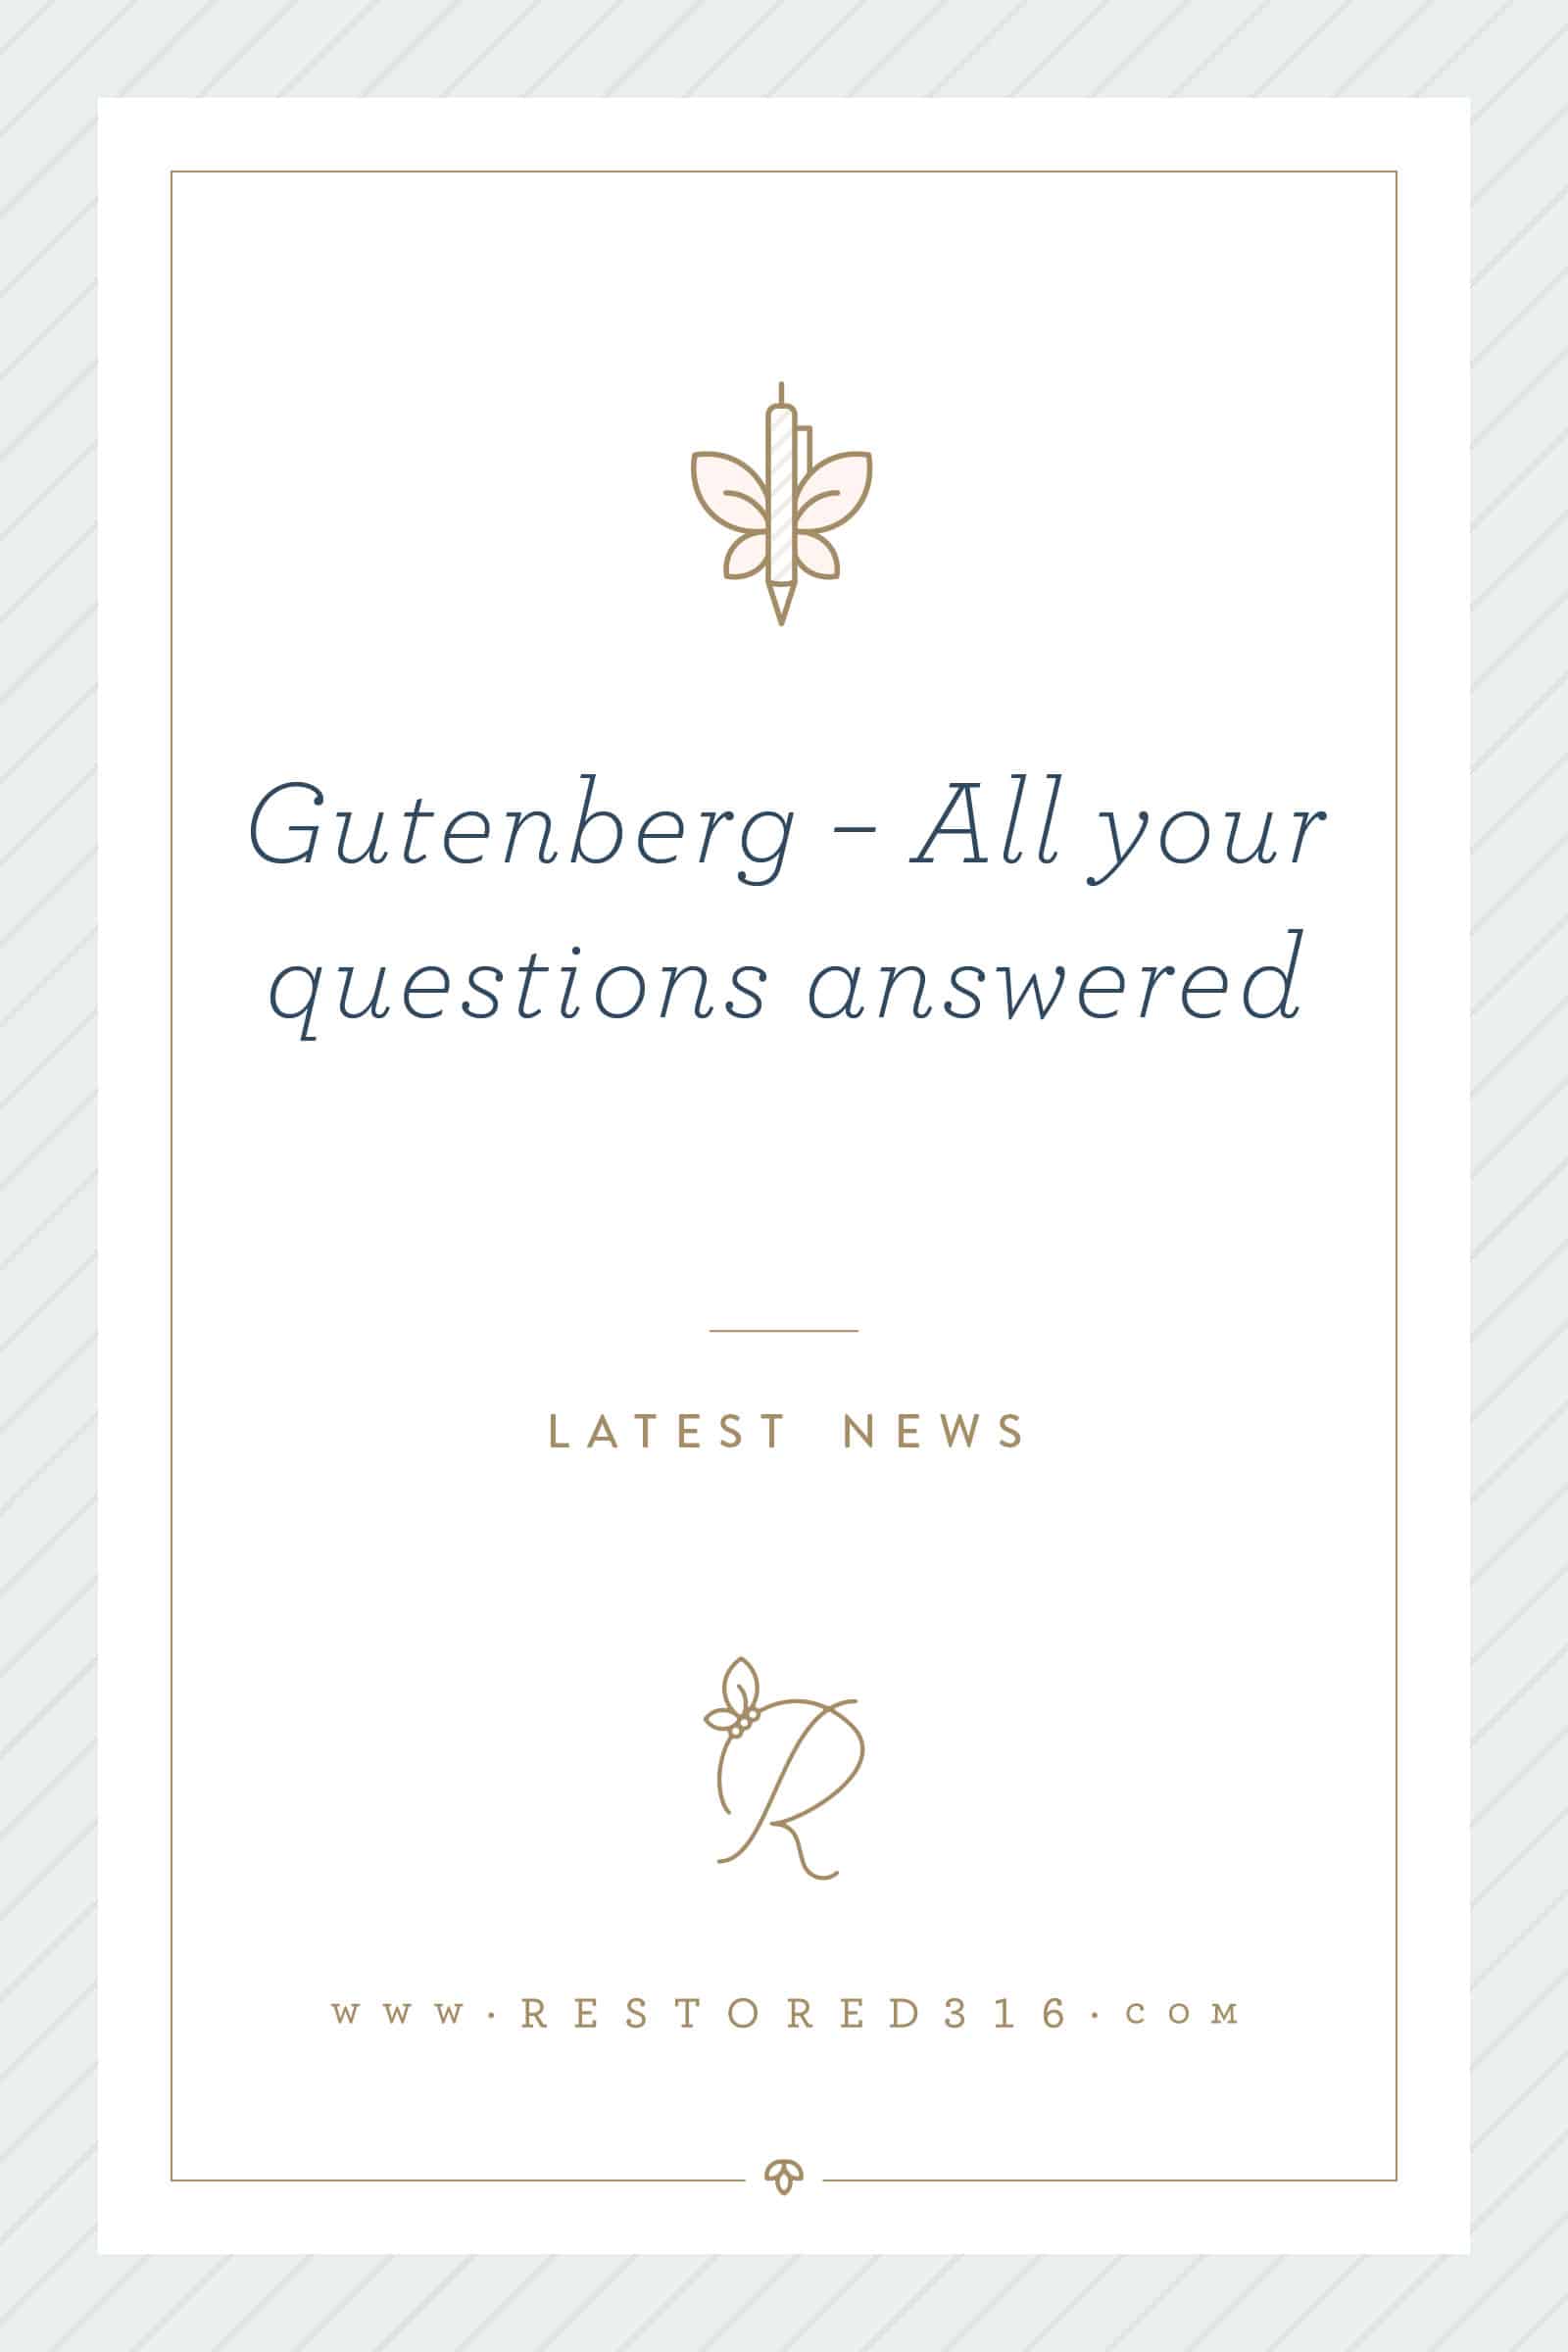 Gutenberg – All your questions answered